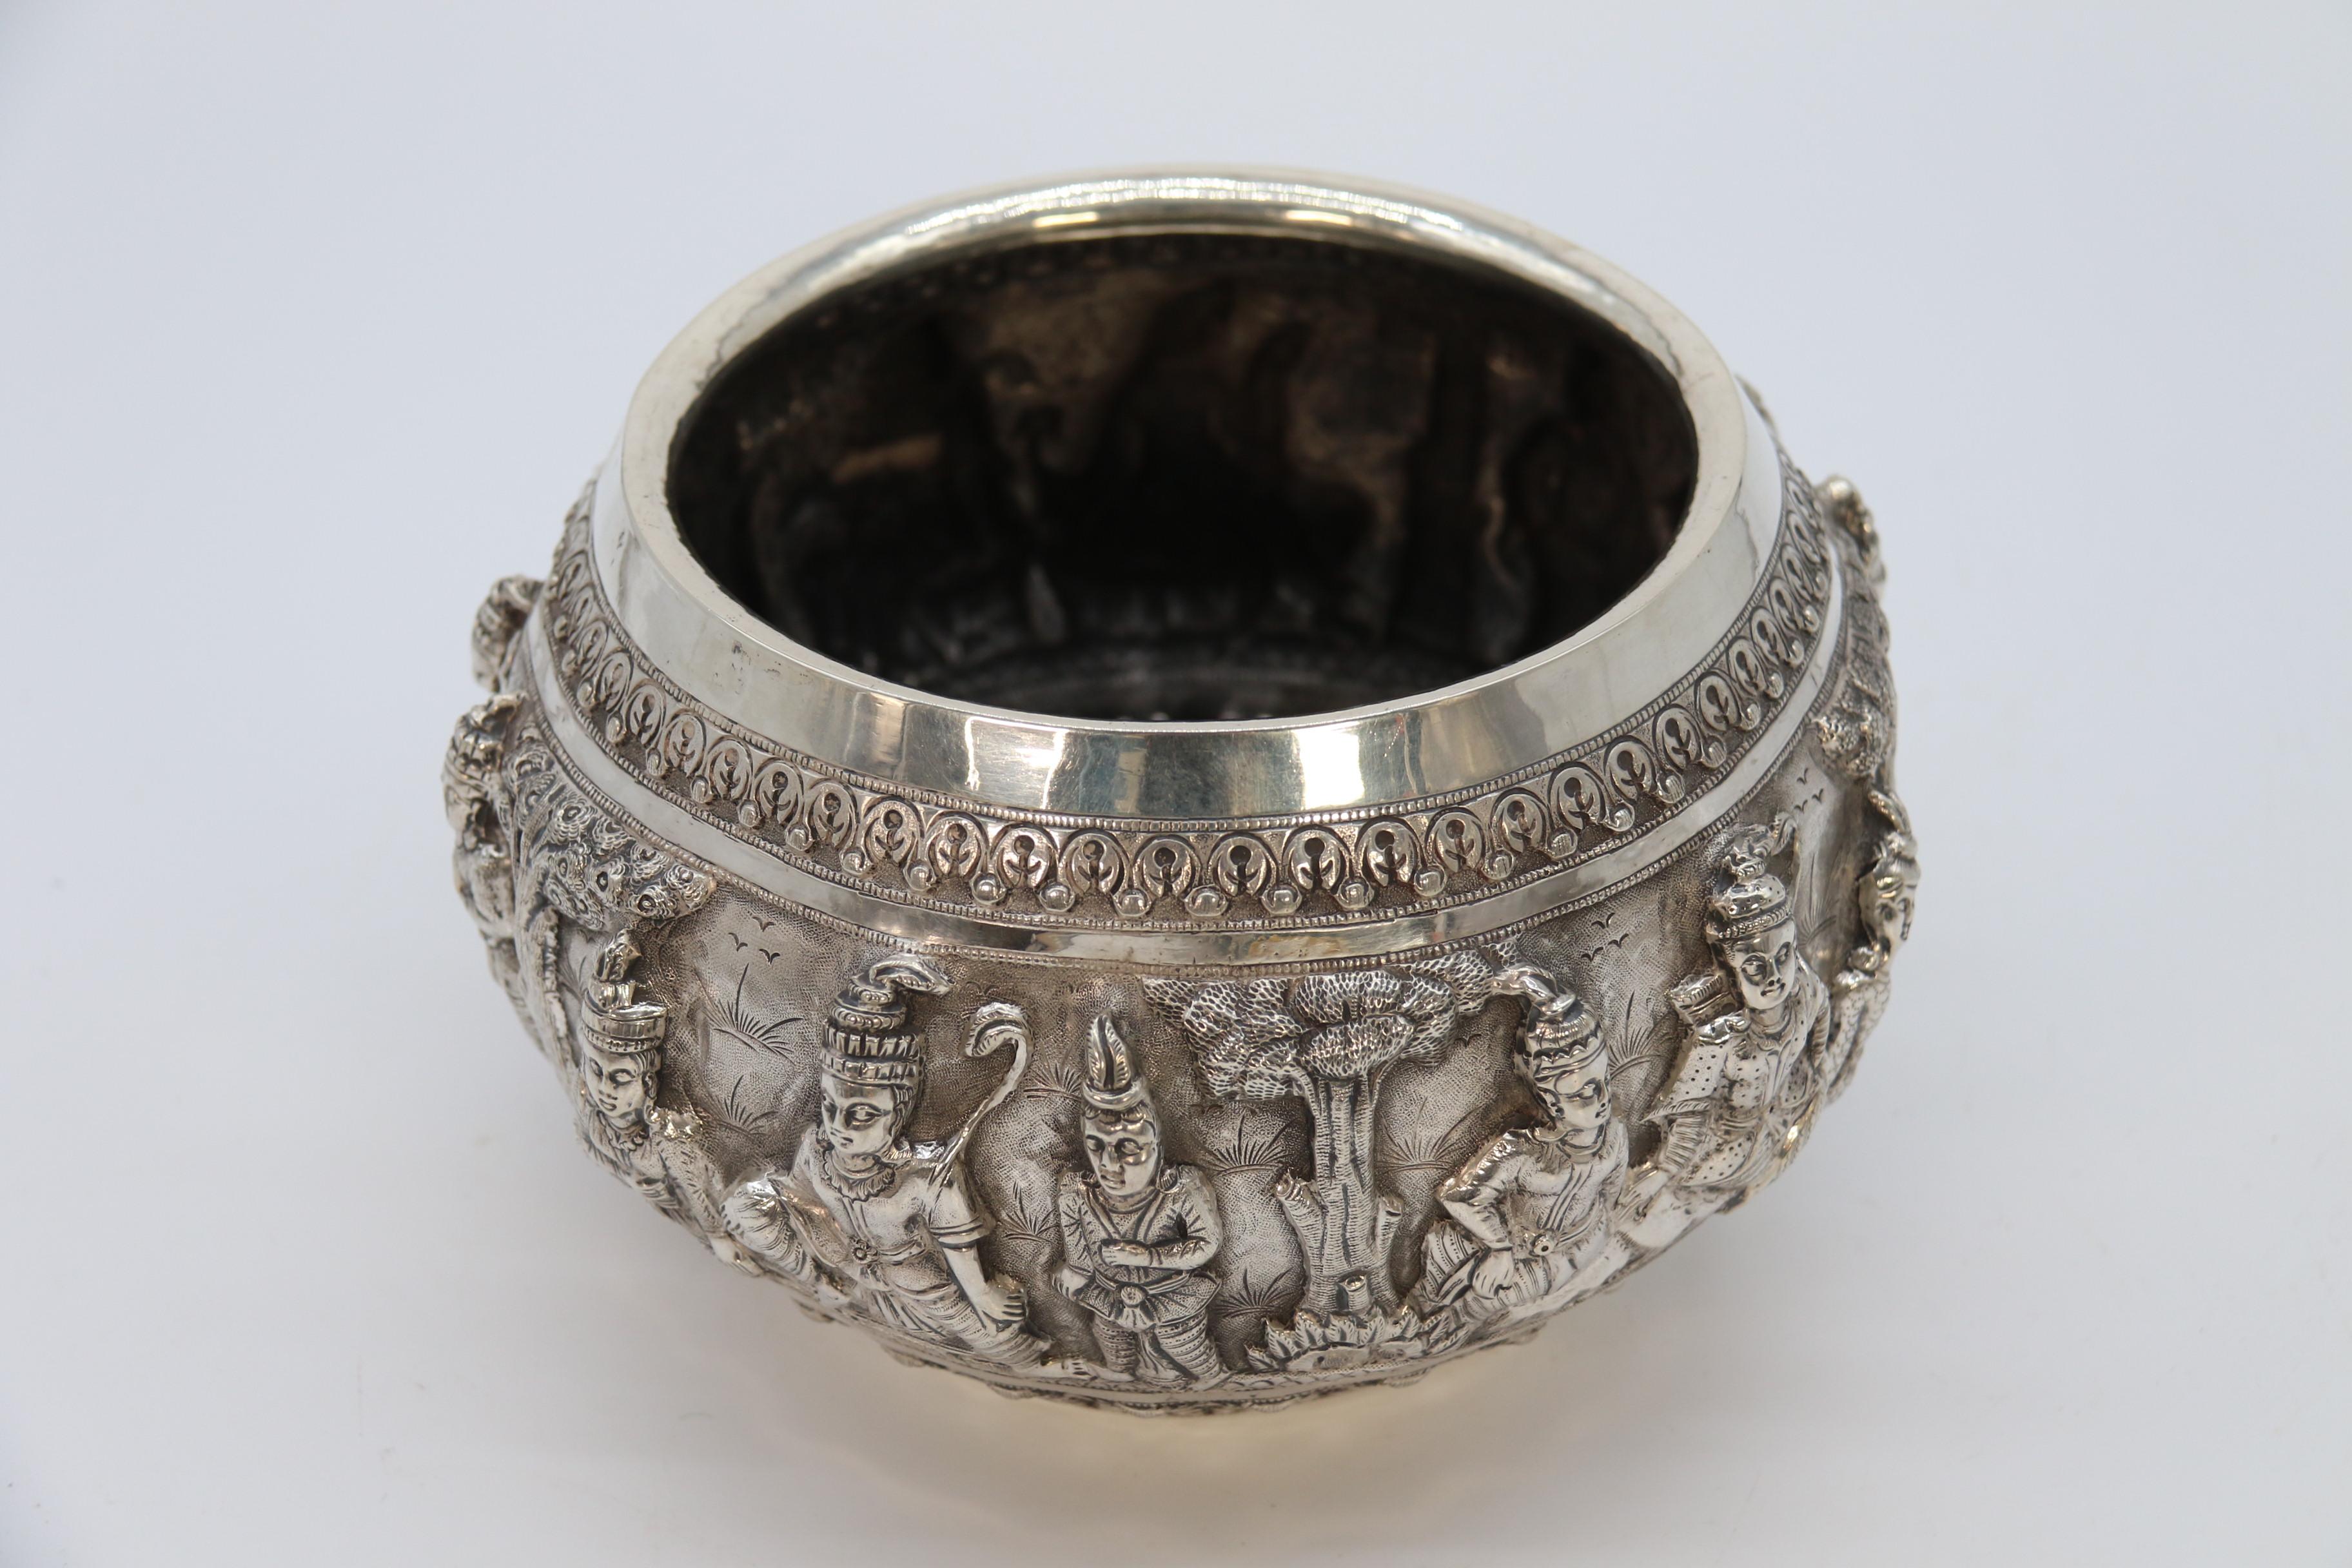 19th century Indian silver Raj period deep relief repousse work bowl circa 1870 For Sale 6